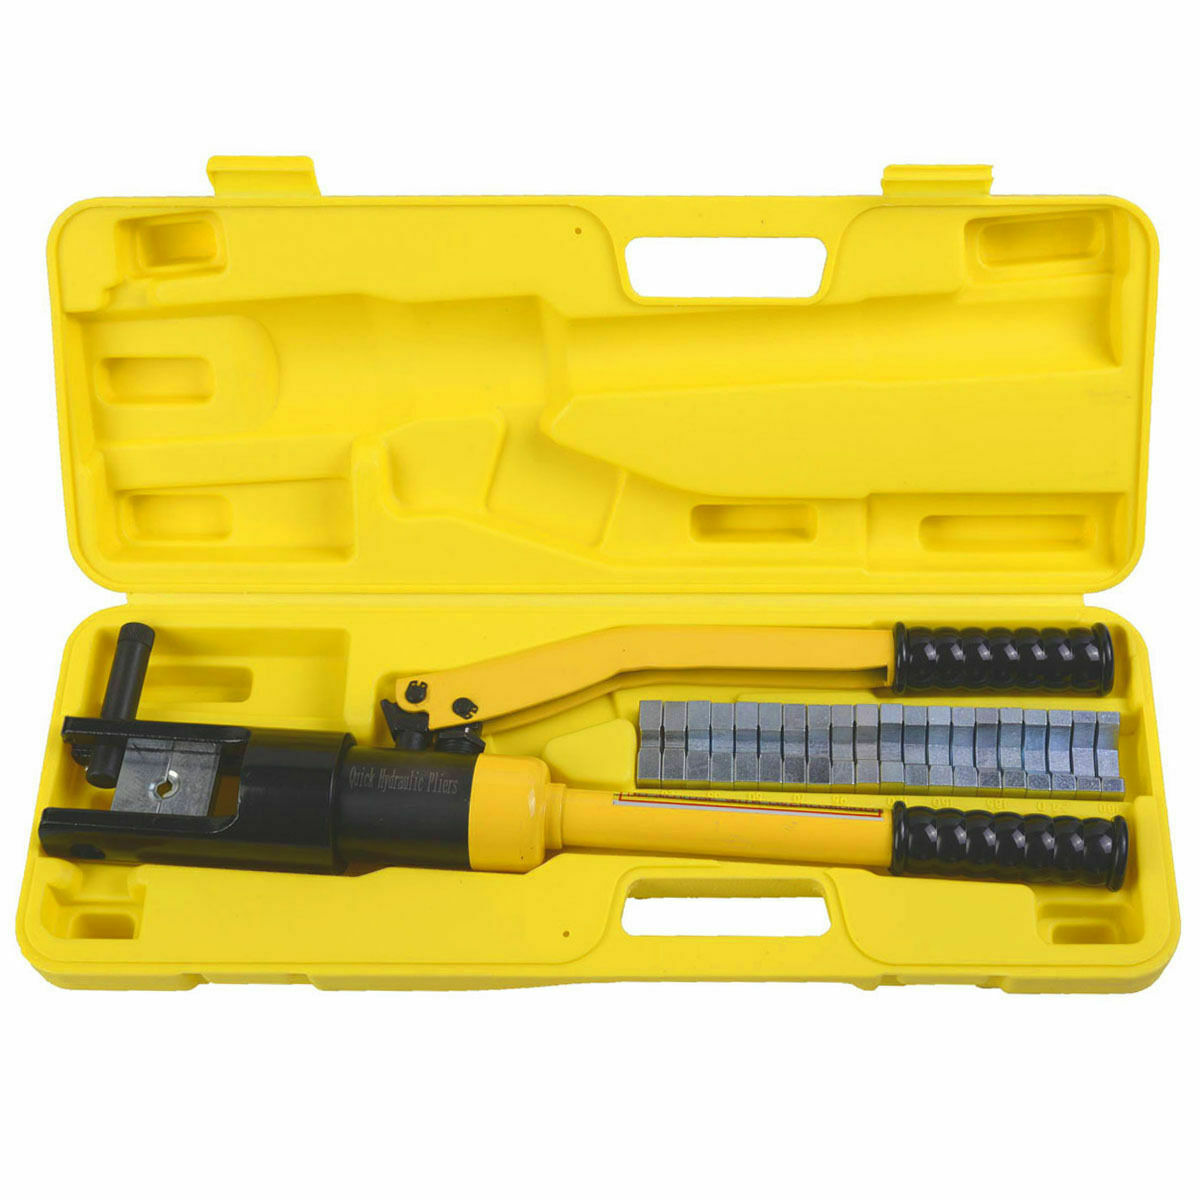 Wire Terminal Crimper Battery Cable Lug Crimping Tool w/Dies 16 Ton ...